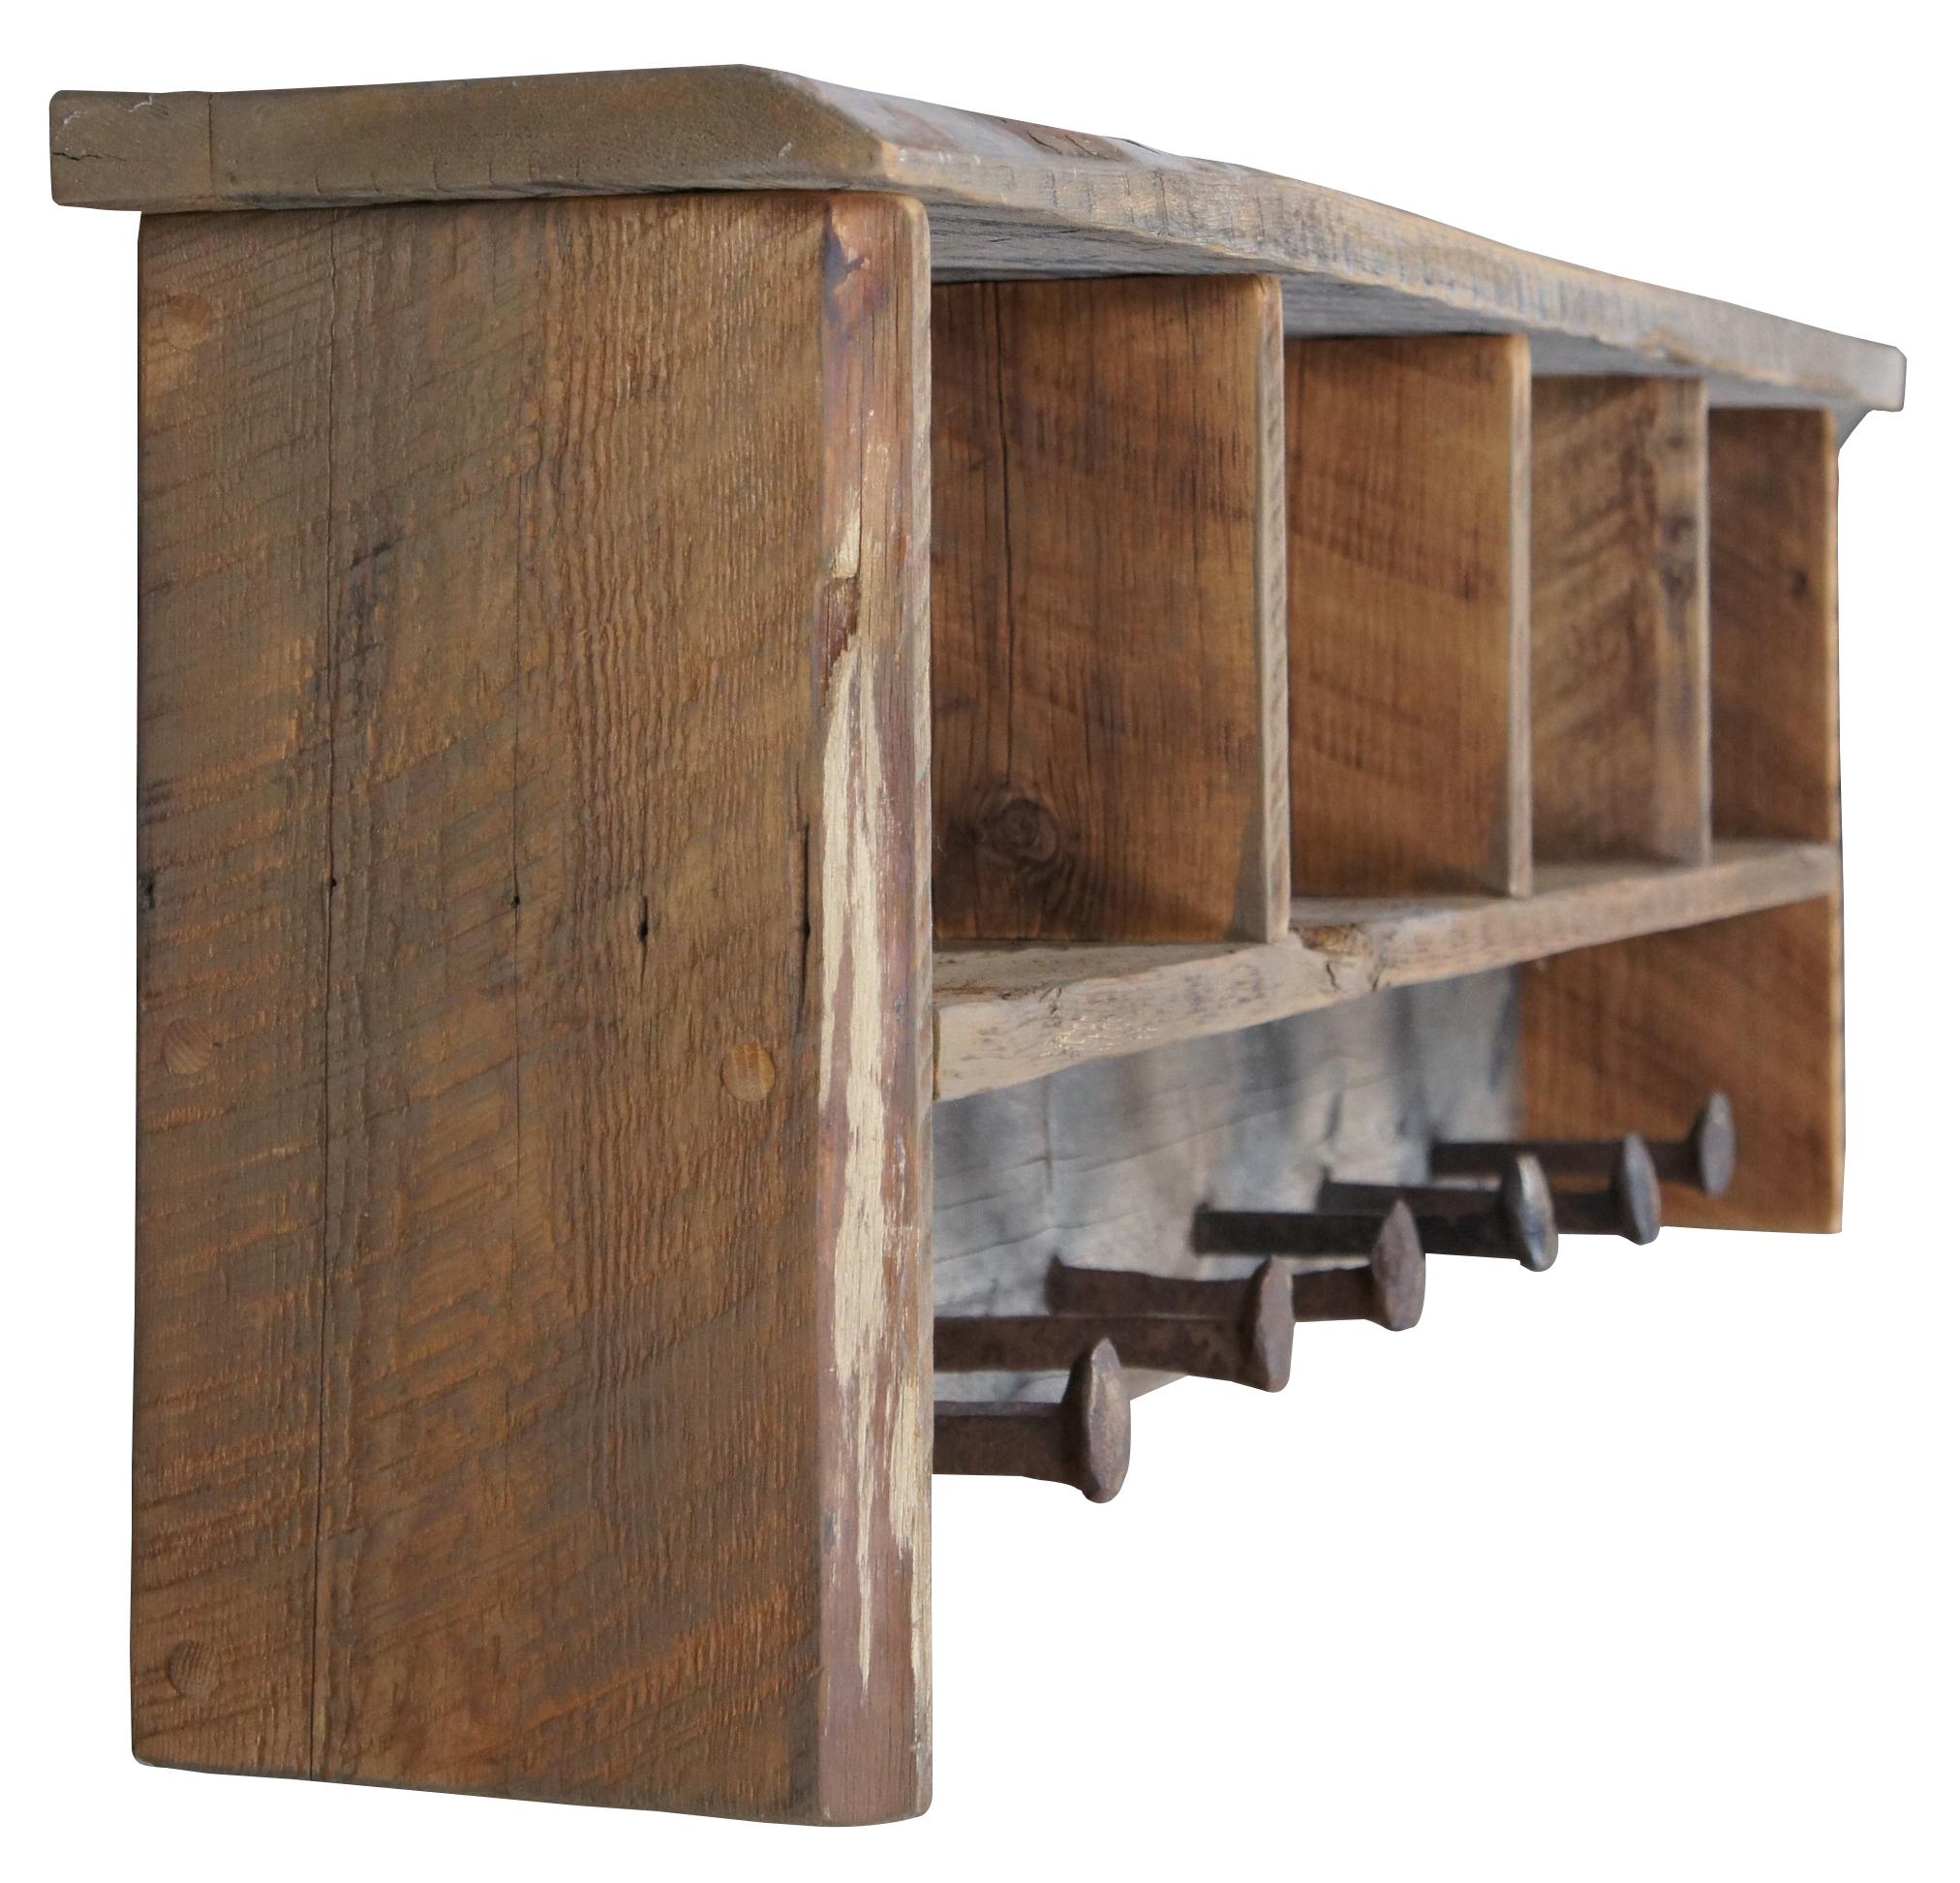 Rustic reclaimed pine wall shelf. Handmade in Aspen Colorado, circa 2nd half 20th century. Features four cubbies and railroad spikes as hooks for garments. Signed along the back.

Measures: 46